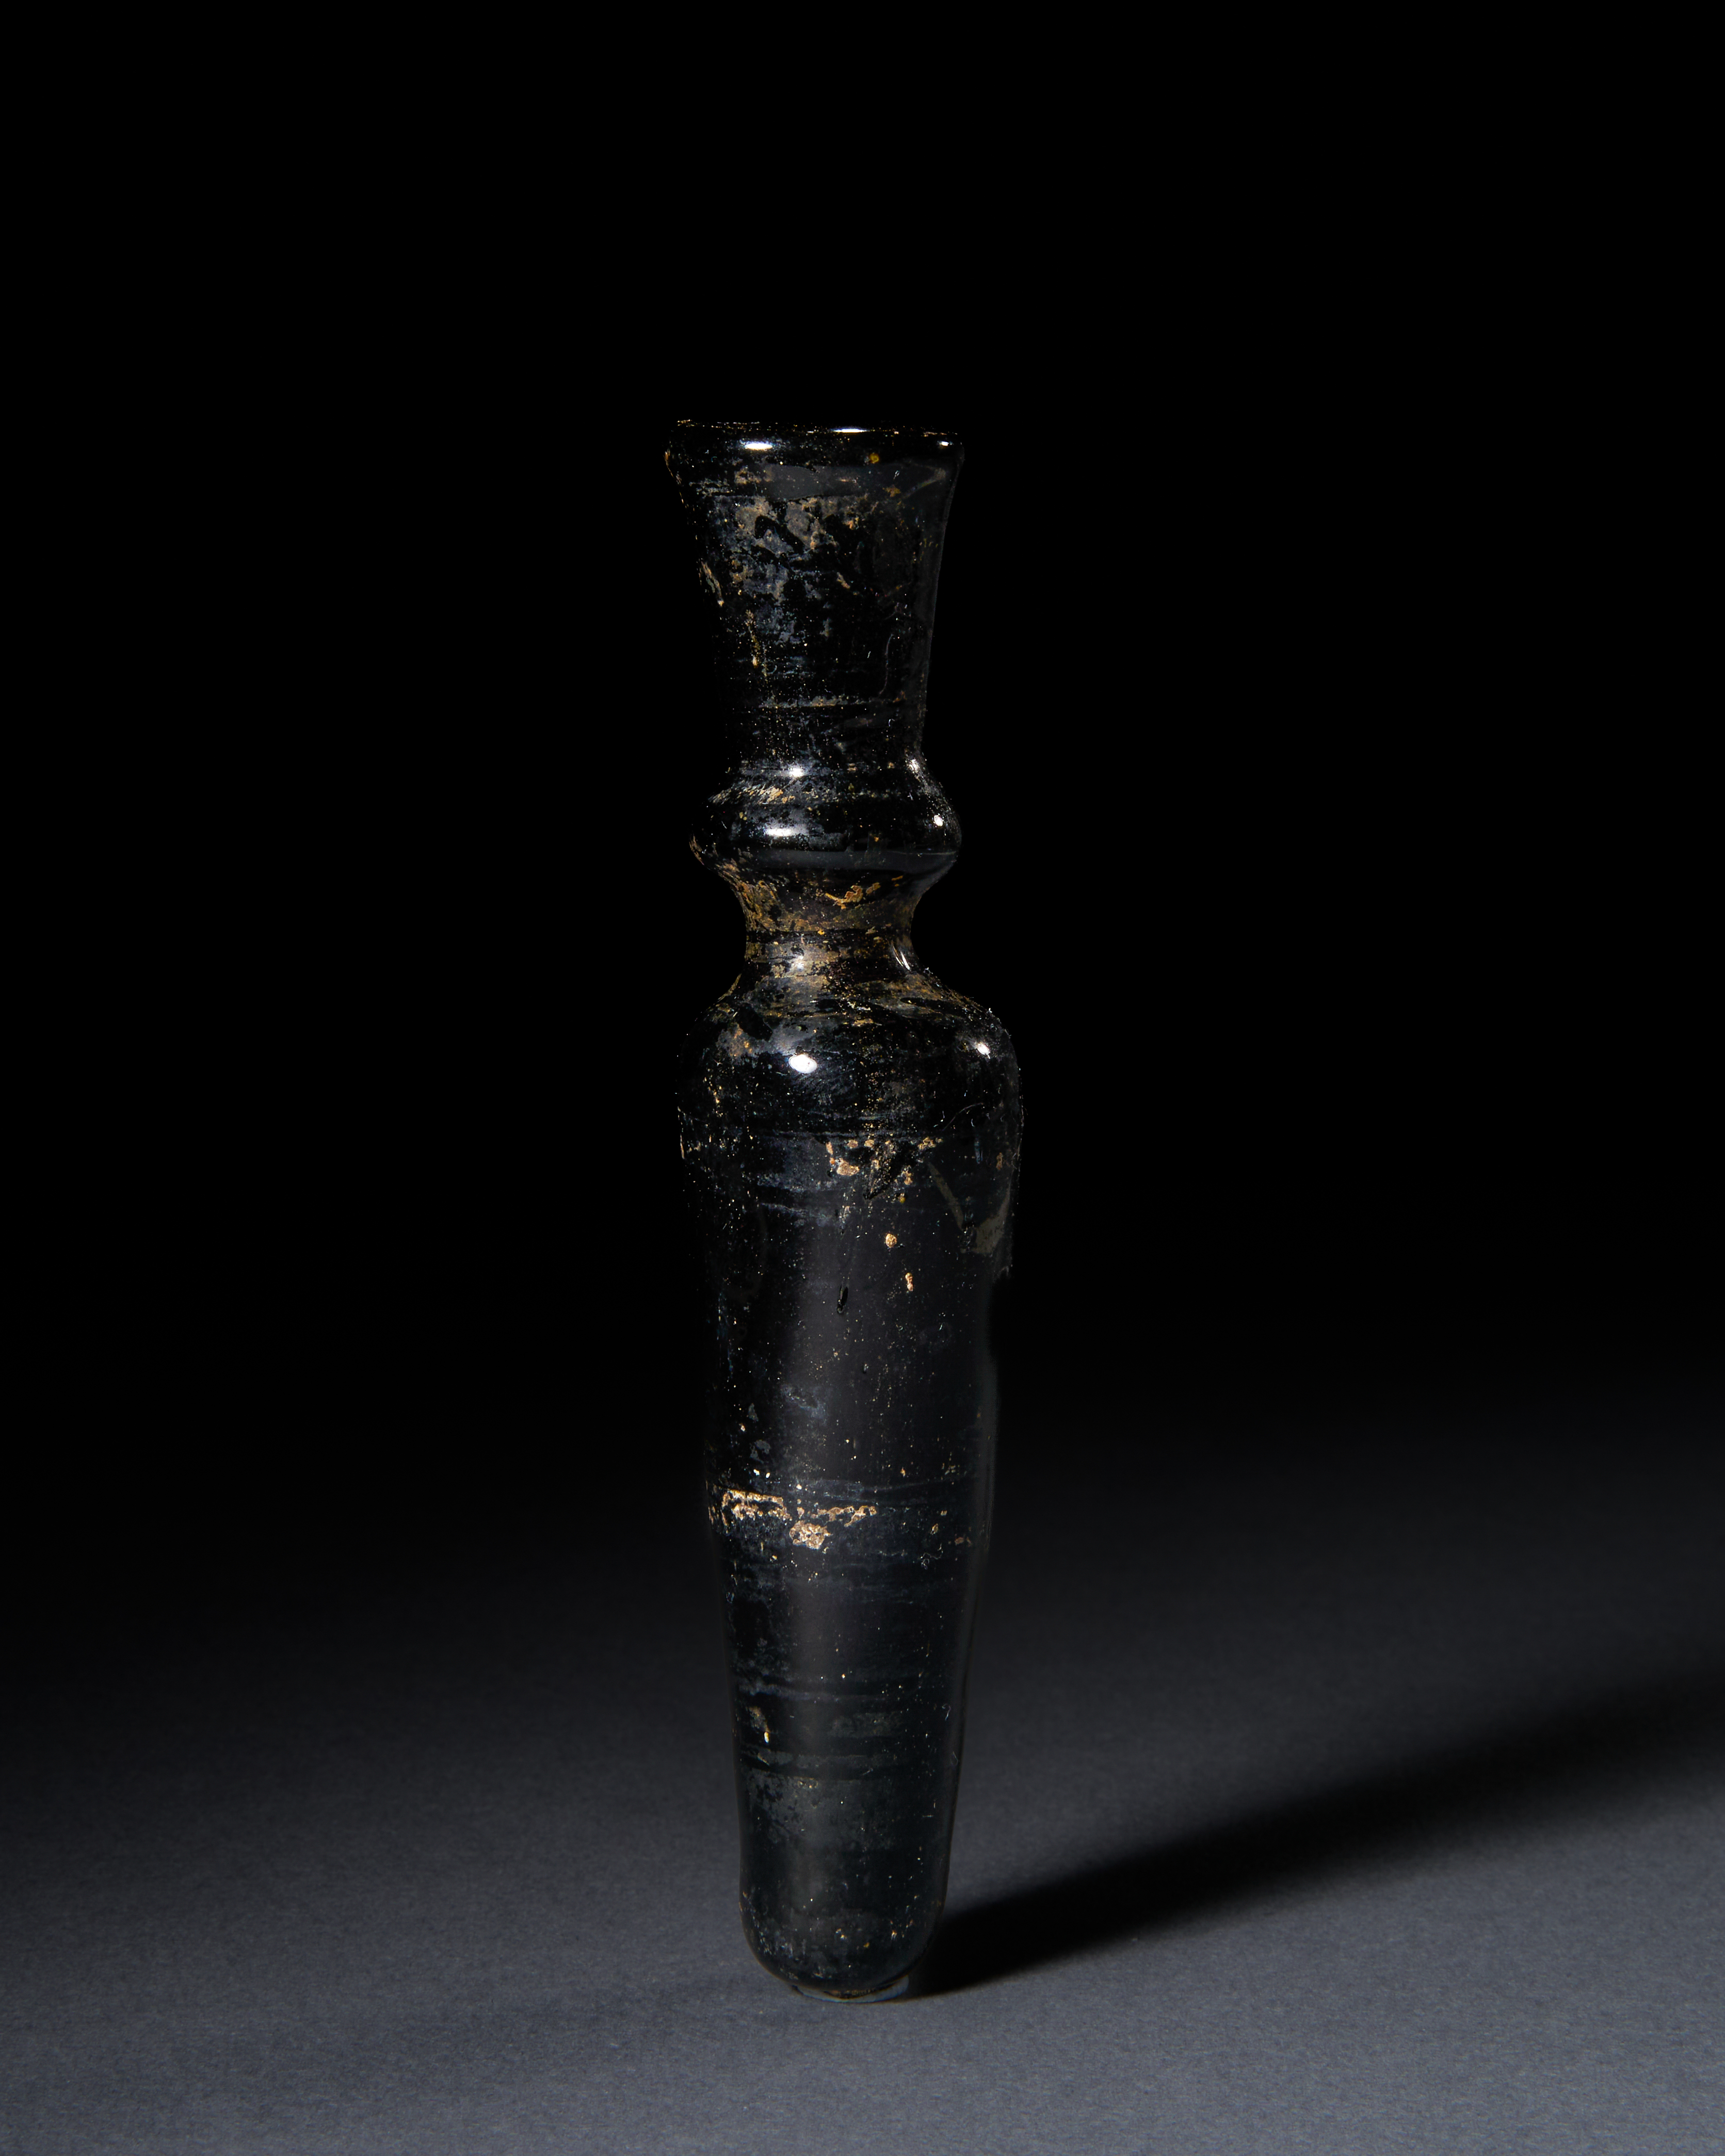 A BLACK GLASS FATIMID COSMETIC VASE, 9TH CENTURY, EGYPT